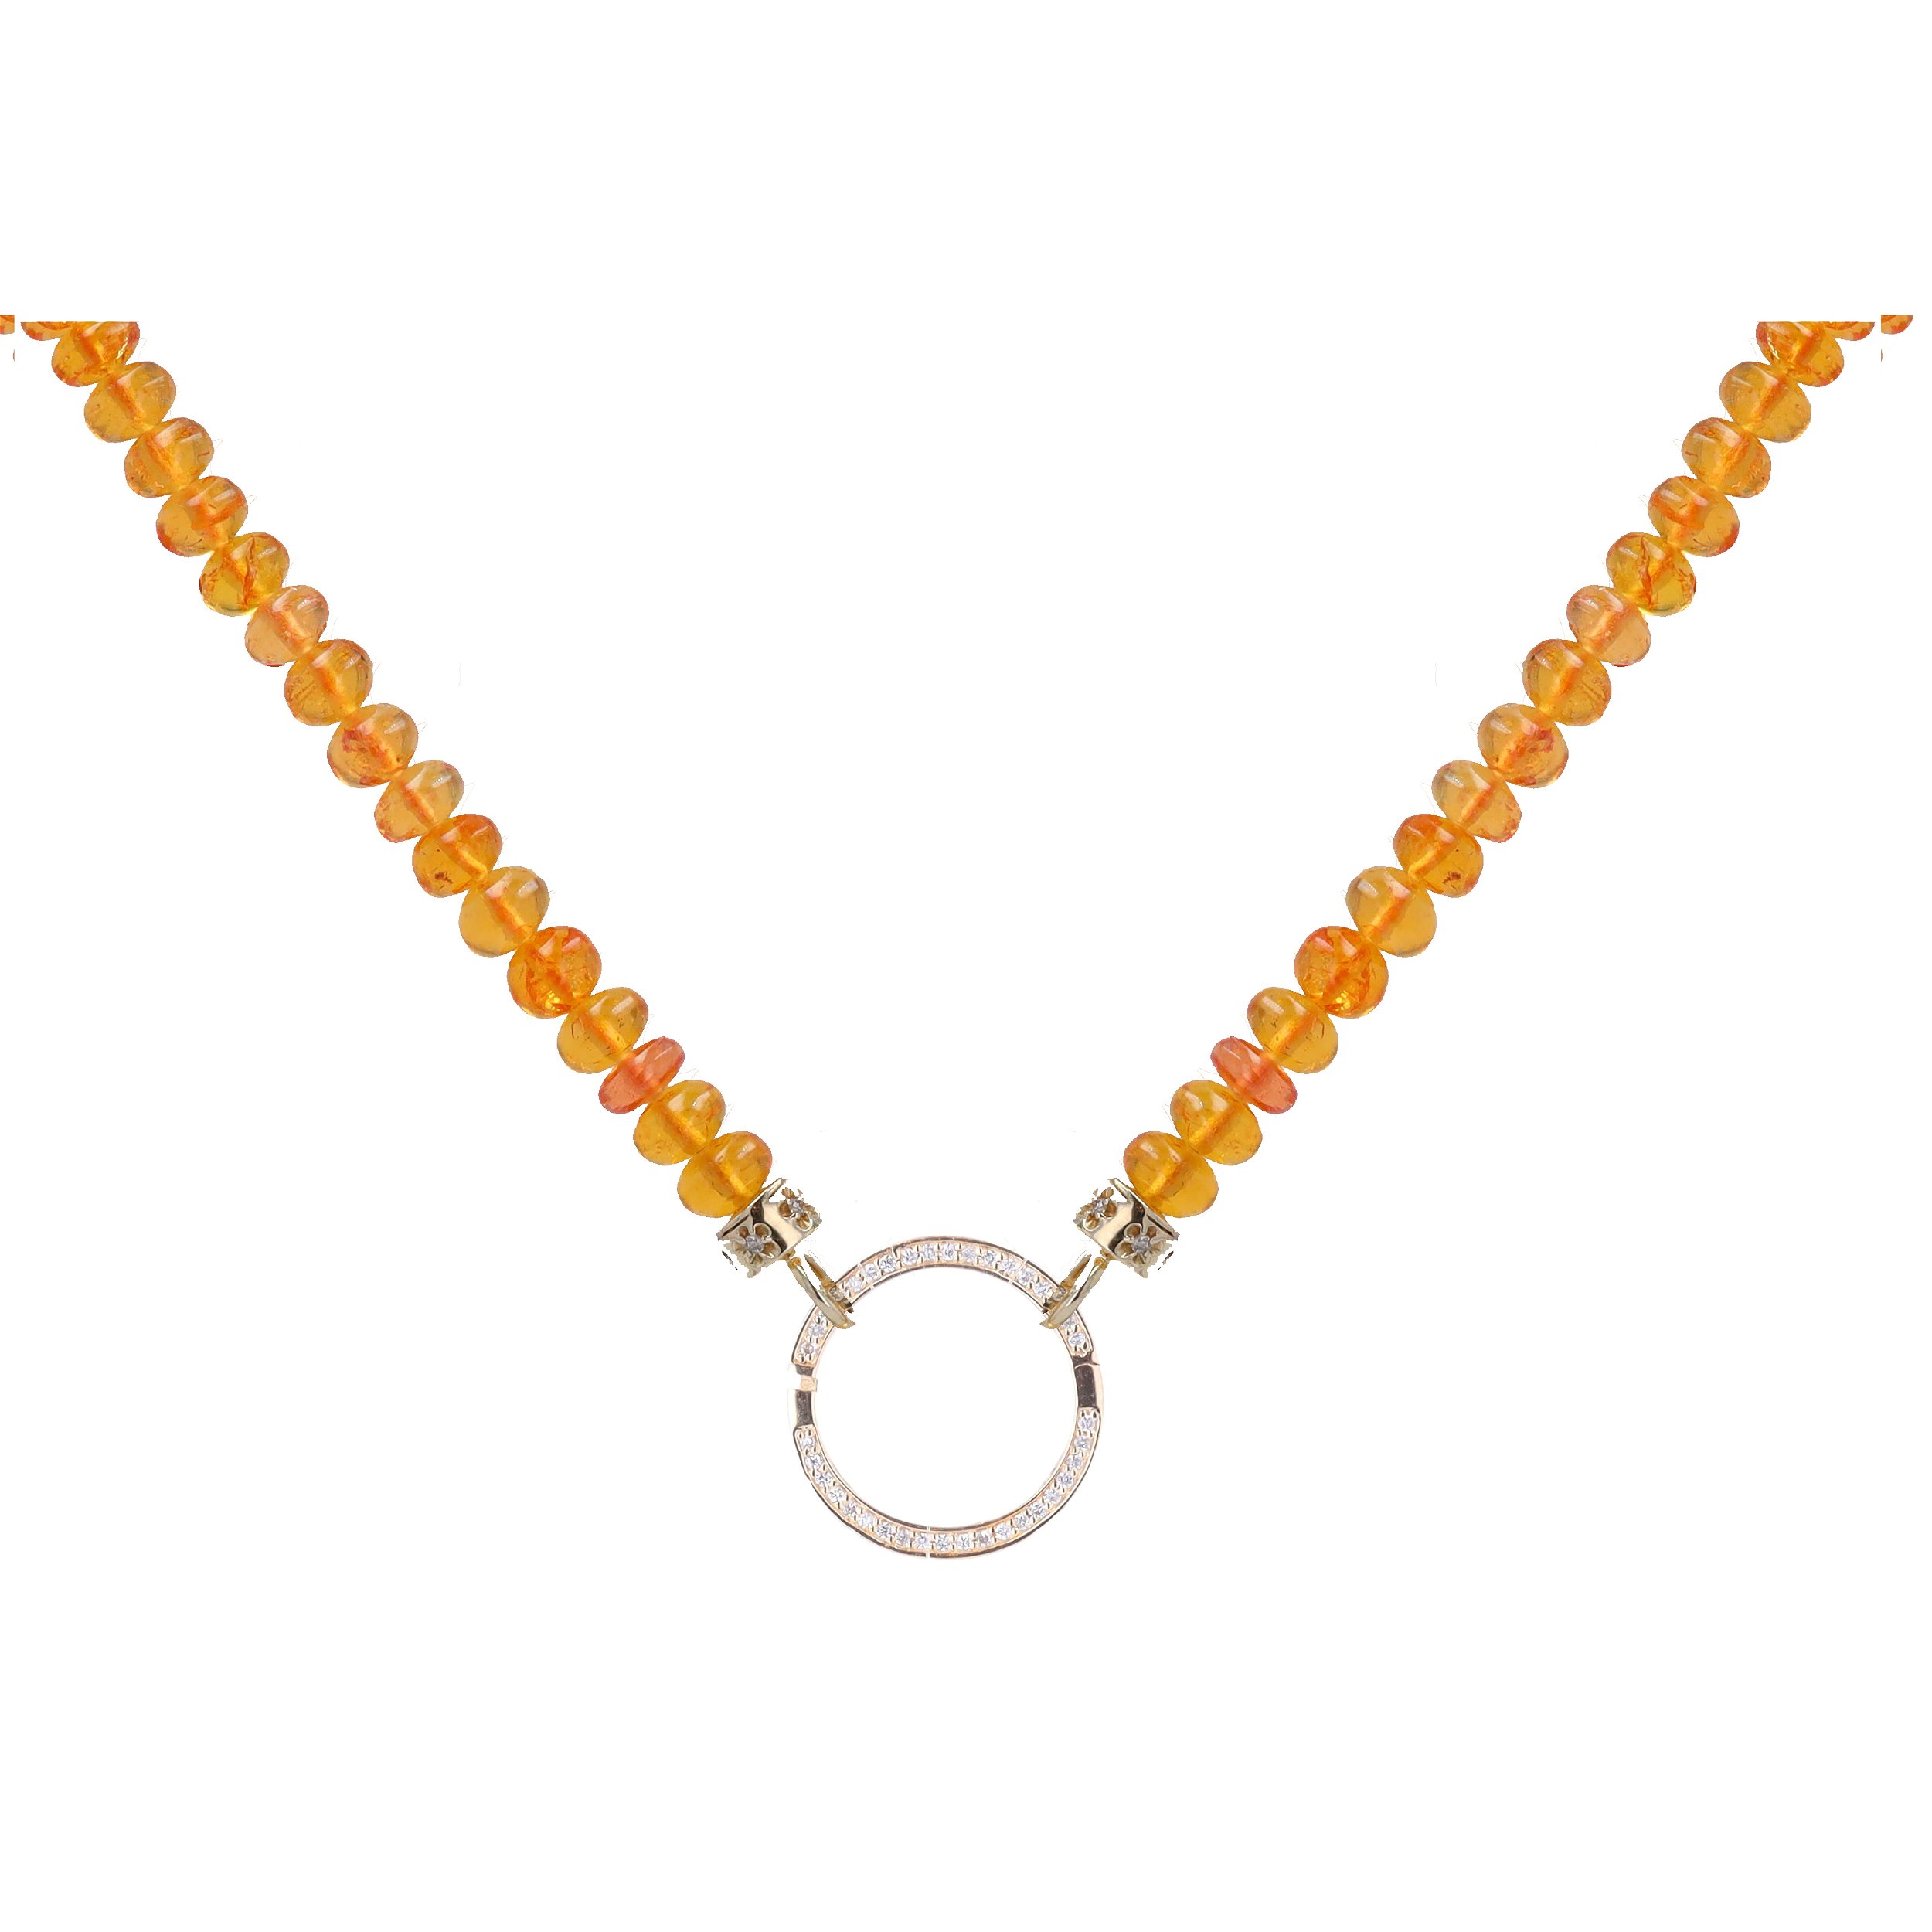 18"-20" 5mm Translucent Hand Polished Orange Garnet Beaded Chain With 14k Gold Extension And End Caps with Diamonds